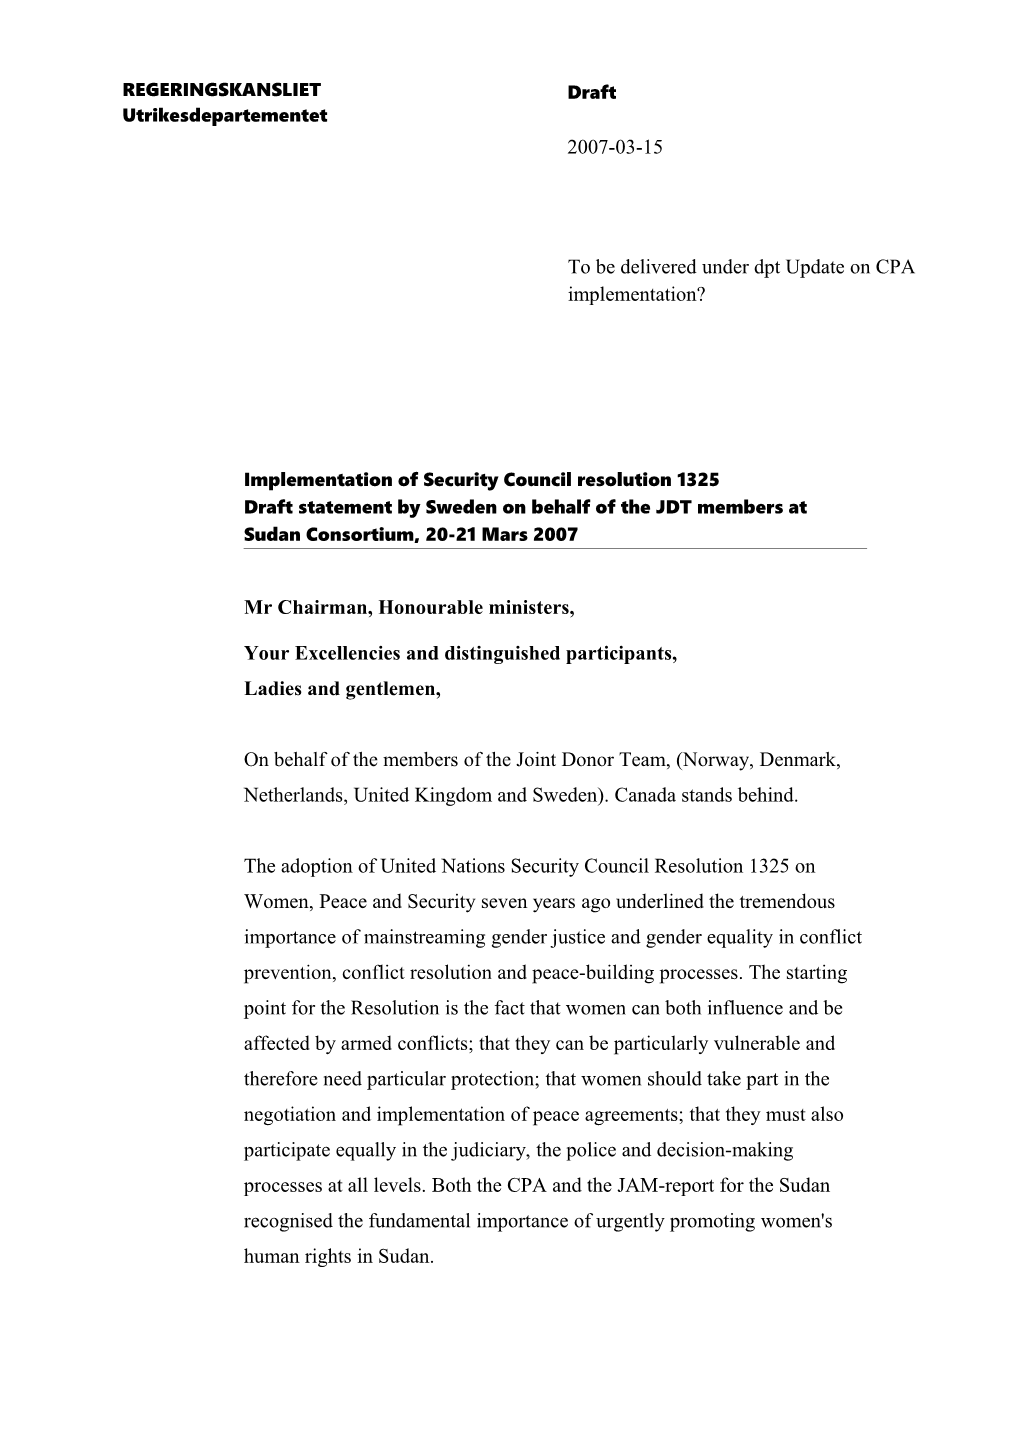 Implementation of Security Council Resolution 1325